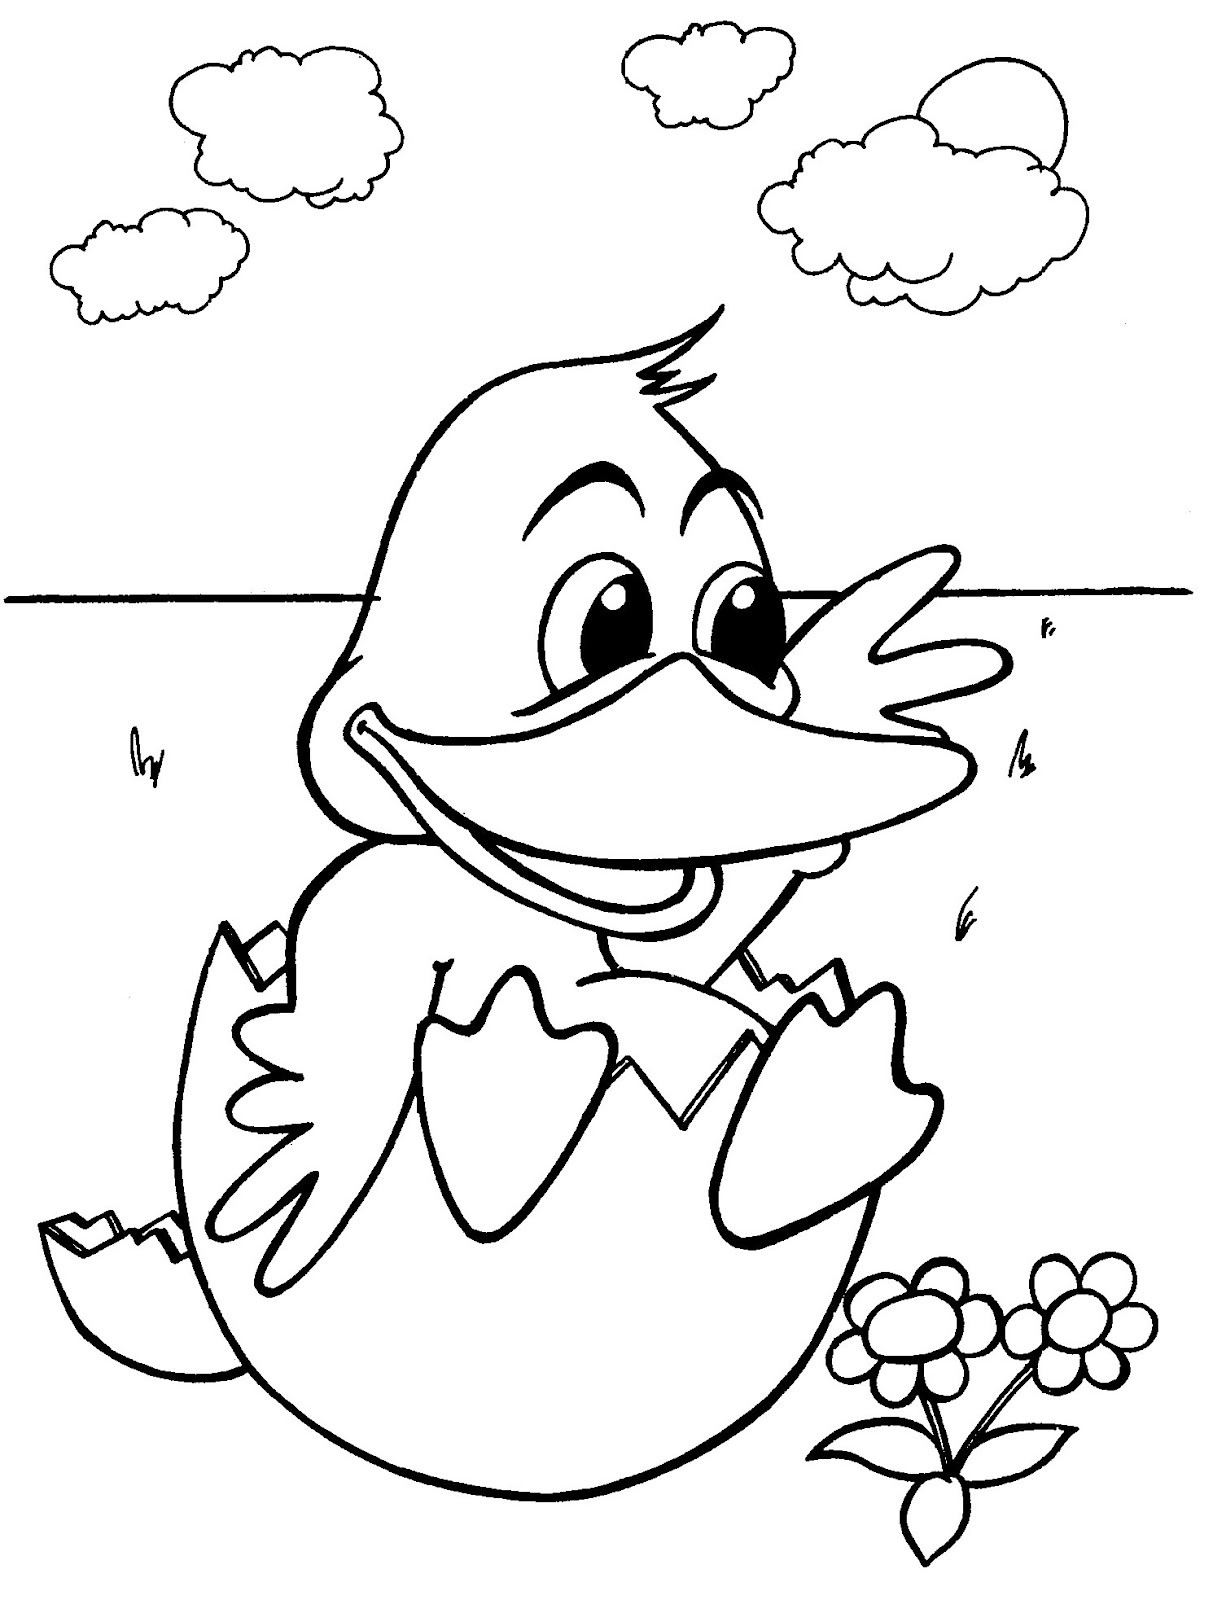 Baby Duck Coloring Page
 Baby Ducks Coloring Pages